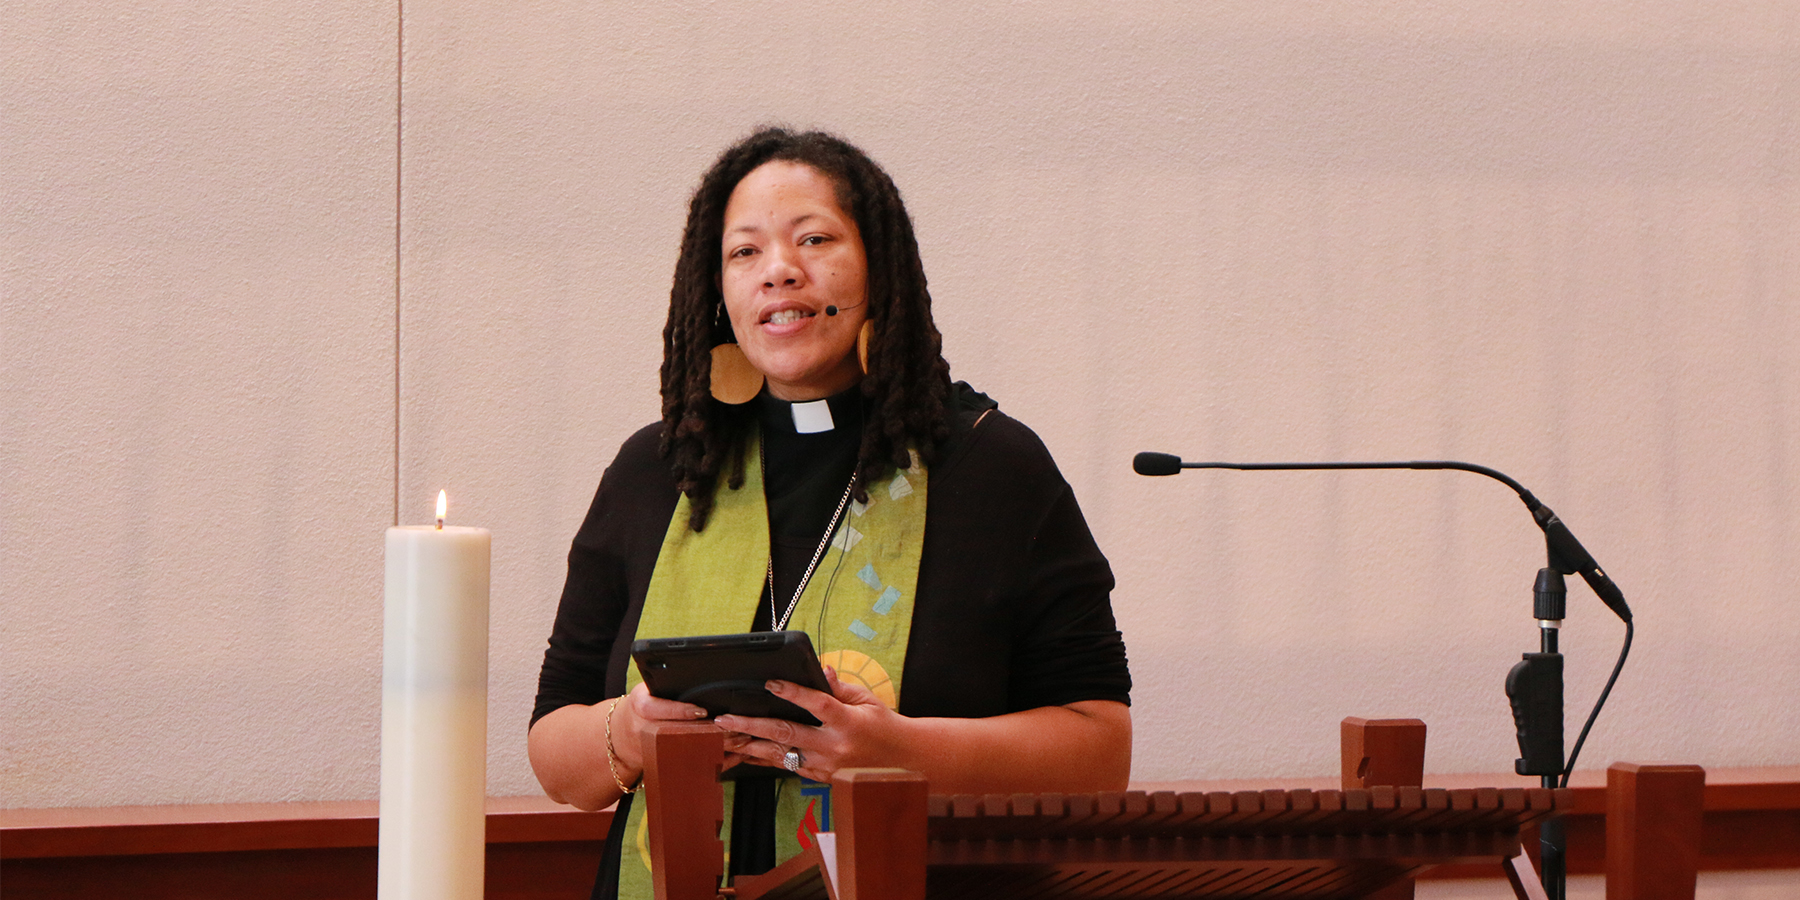 The Rev. Shavon Starling-Louis, co-moderator of the 225th General Assembly of the PC(USA) preached during opening worship. Photo by Rick Jones.